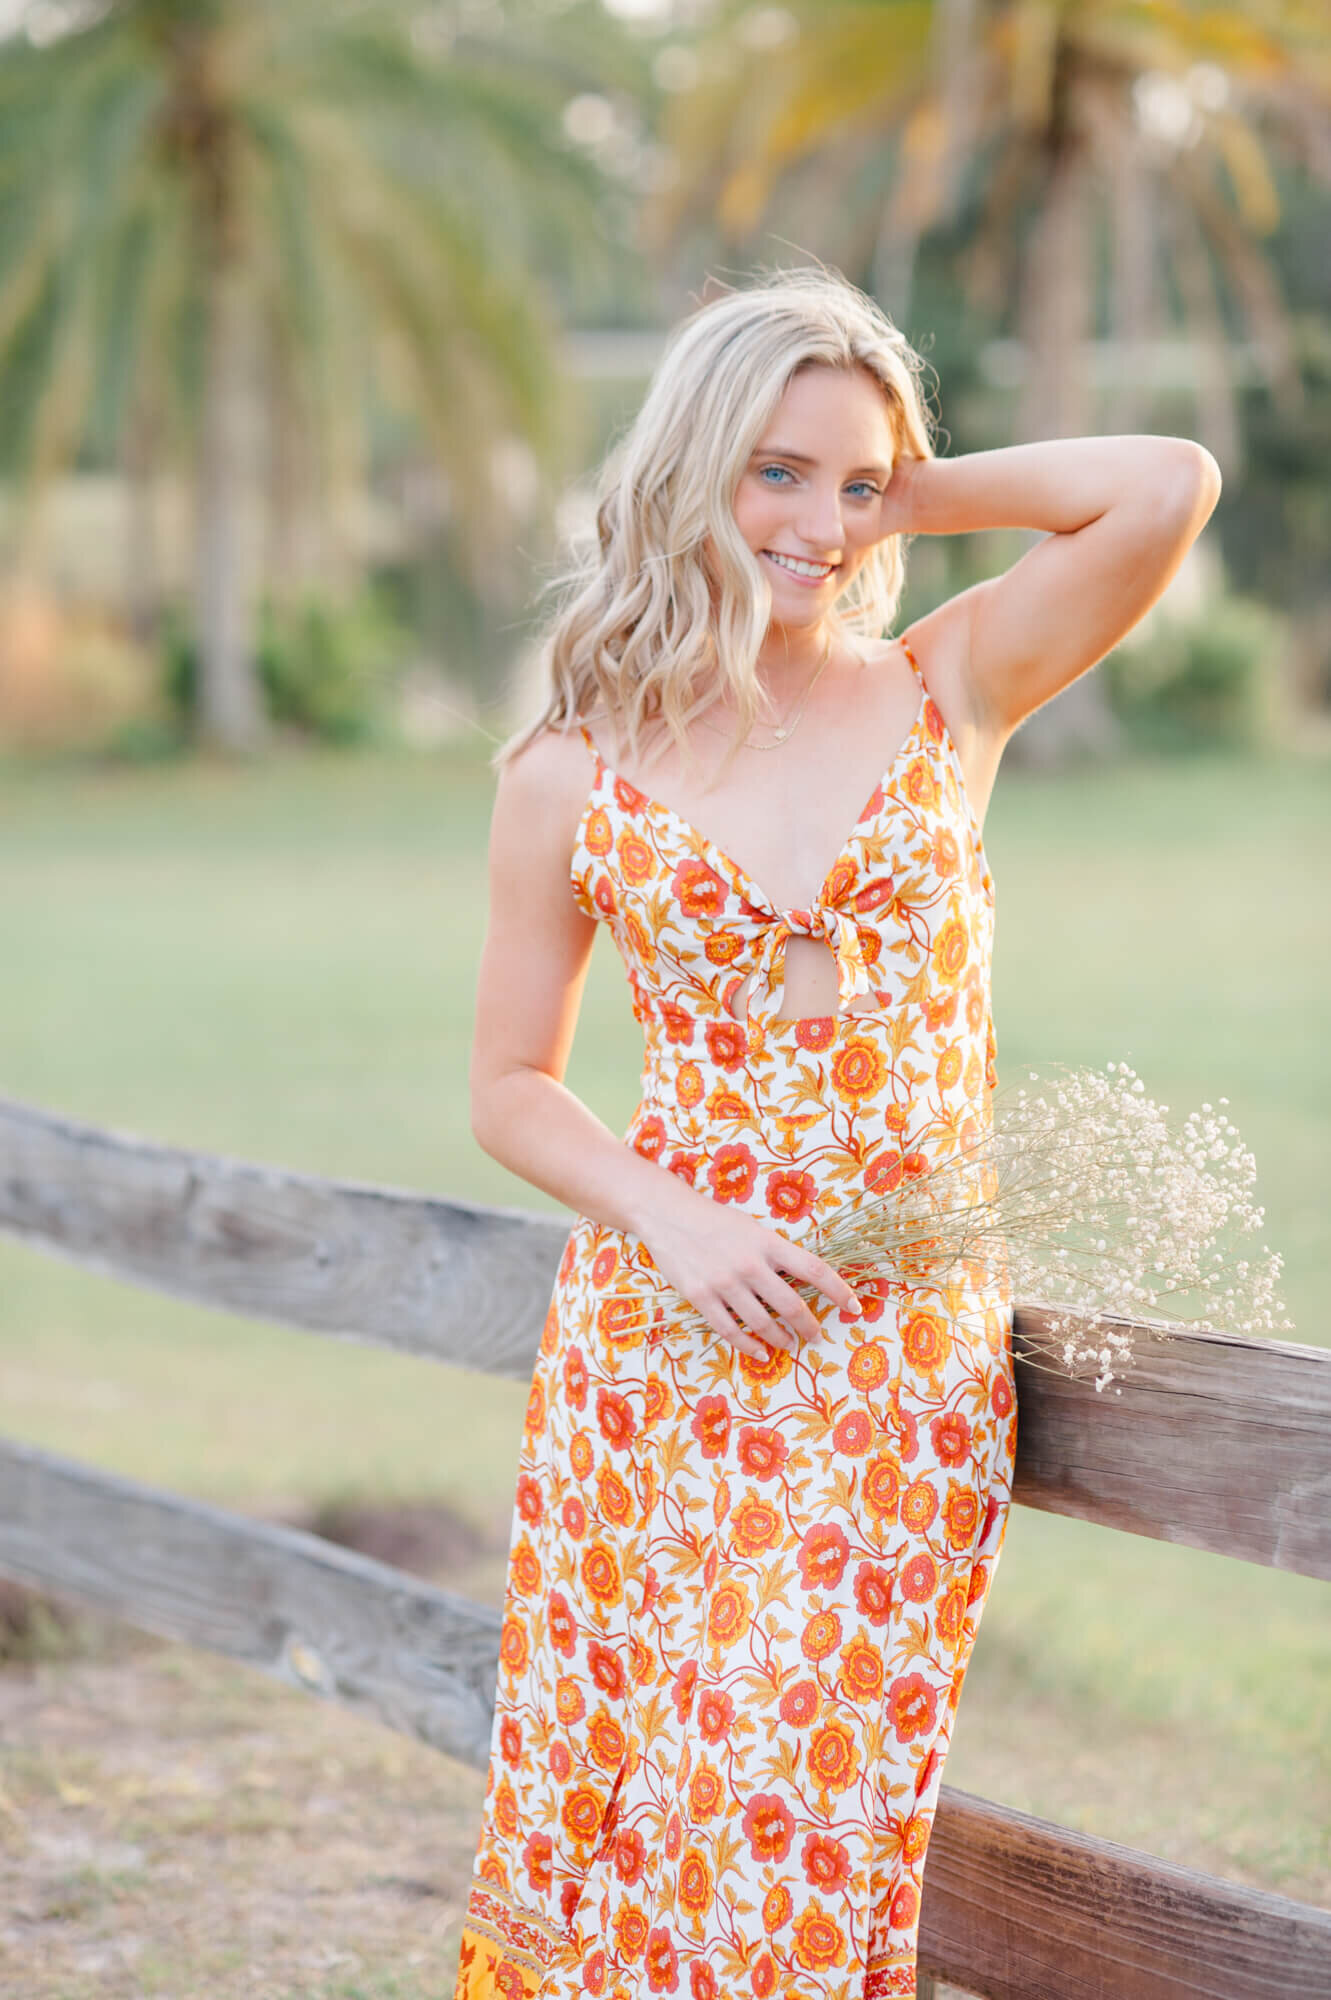 Blonde senior girl stands near a fence holding babys breath during her senior photo session